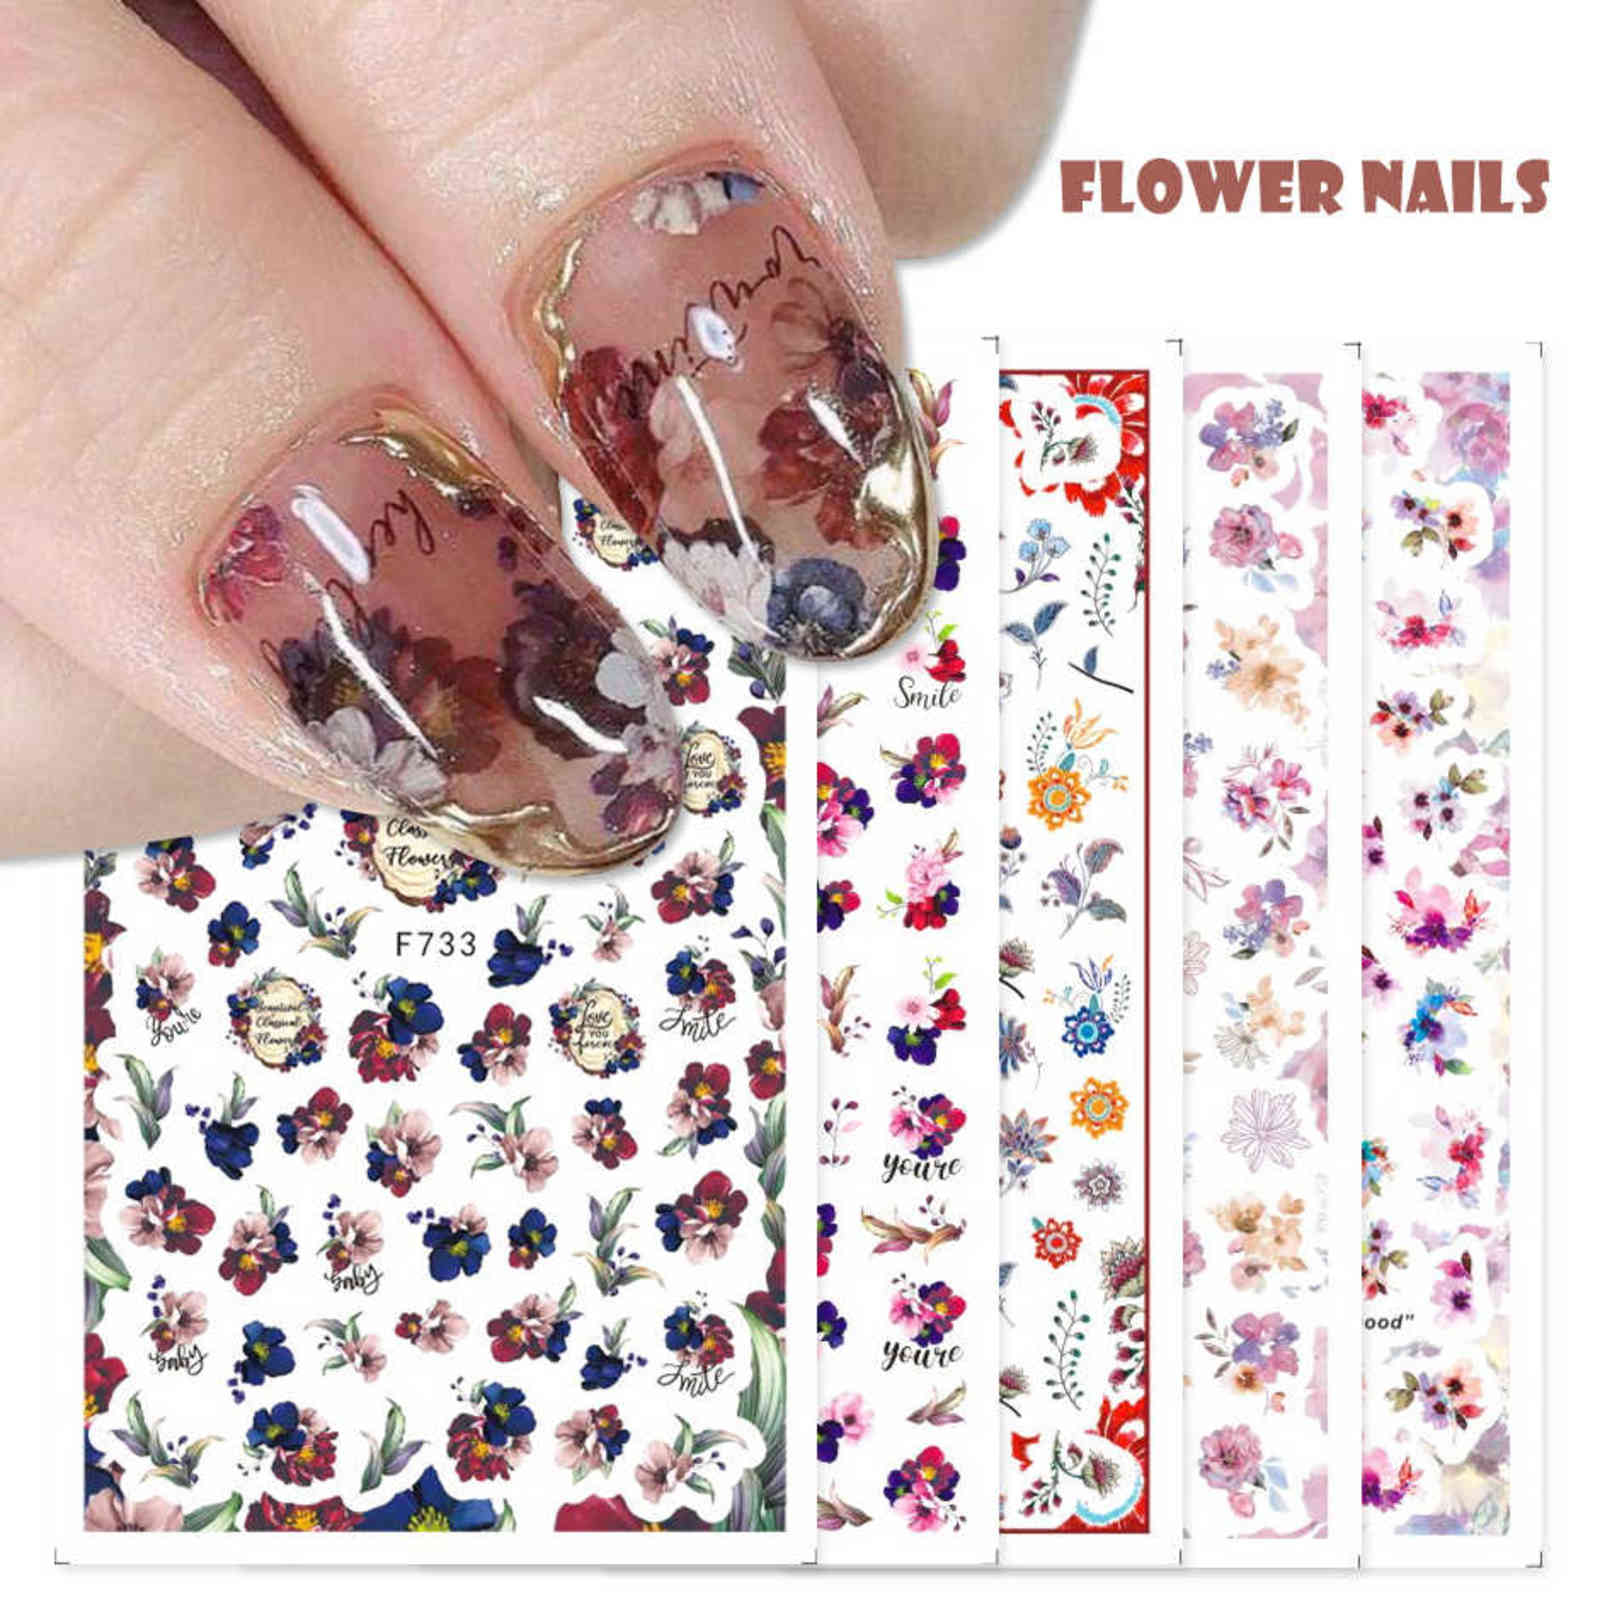 

10pc 3D Vintage Floral Nails Summer Flower Palm Leaves Tropical Nail Stickers Designs All for Manicure Nail Sliders Decor GLF728-737 Y1125, F733